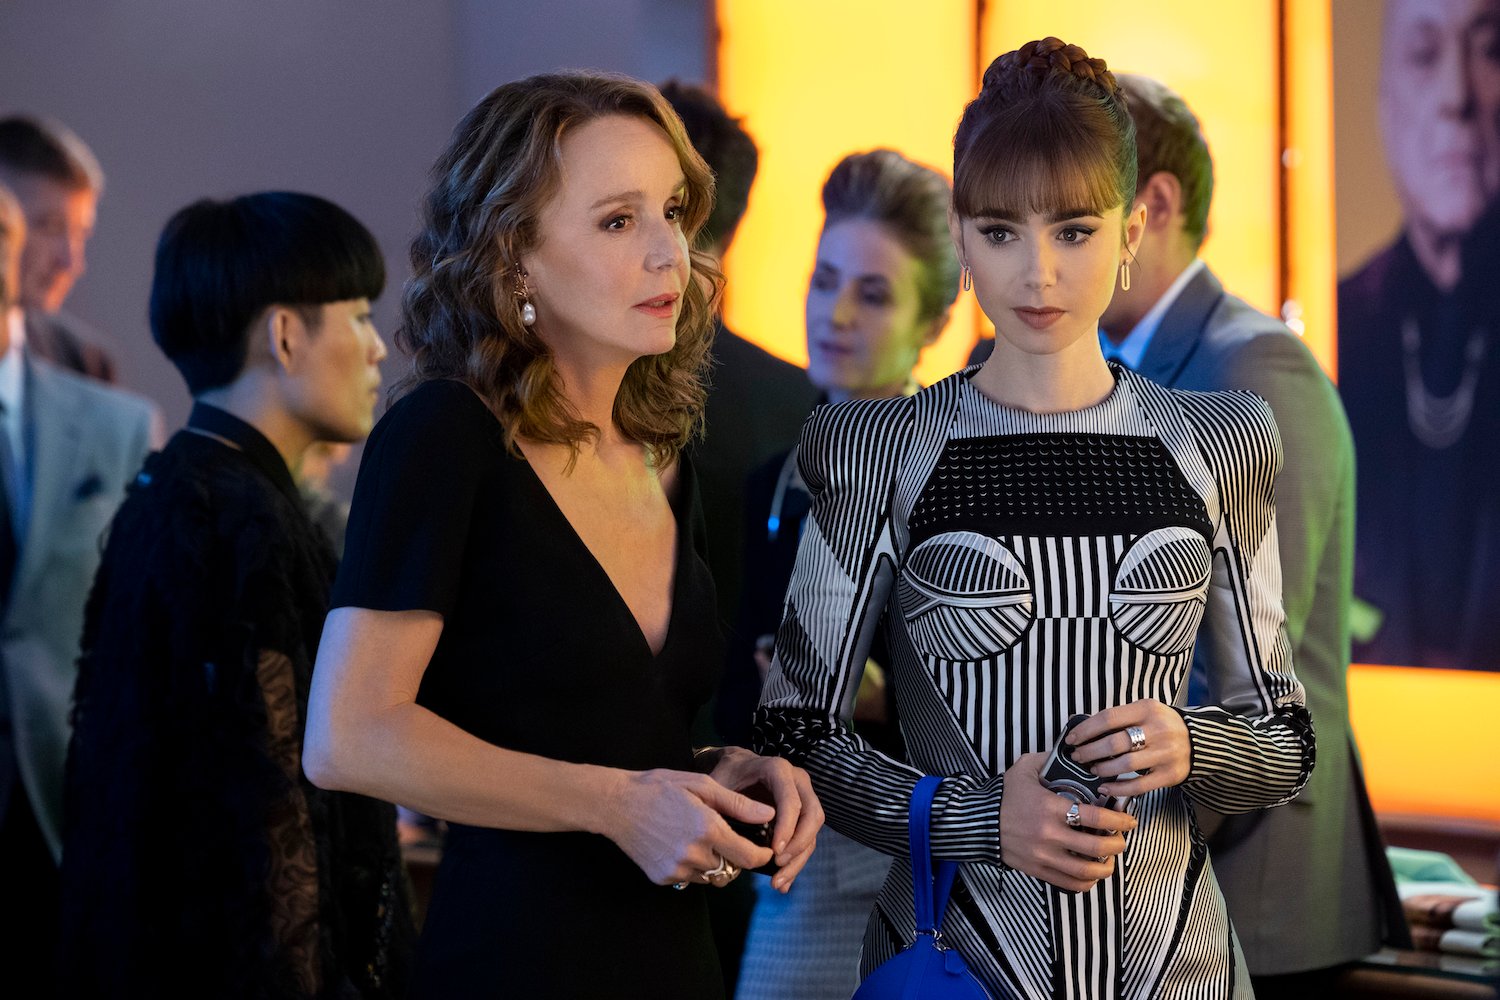 Philippine Leroy-Beaulieu as Sylvie Grateau, Lily Collins as Emily wearing a black and white dress, in a scene from 'Emily in Paris,' one of our picks for some of the most overrated shows on Netflix.